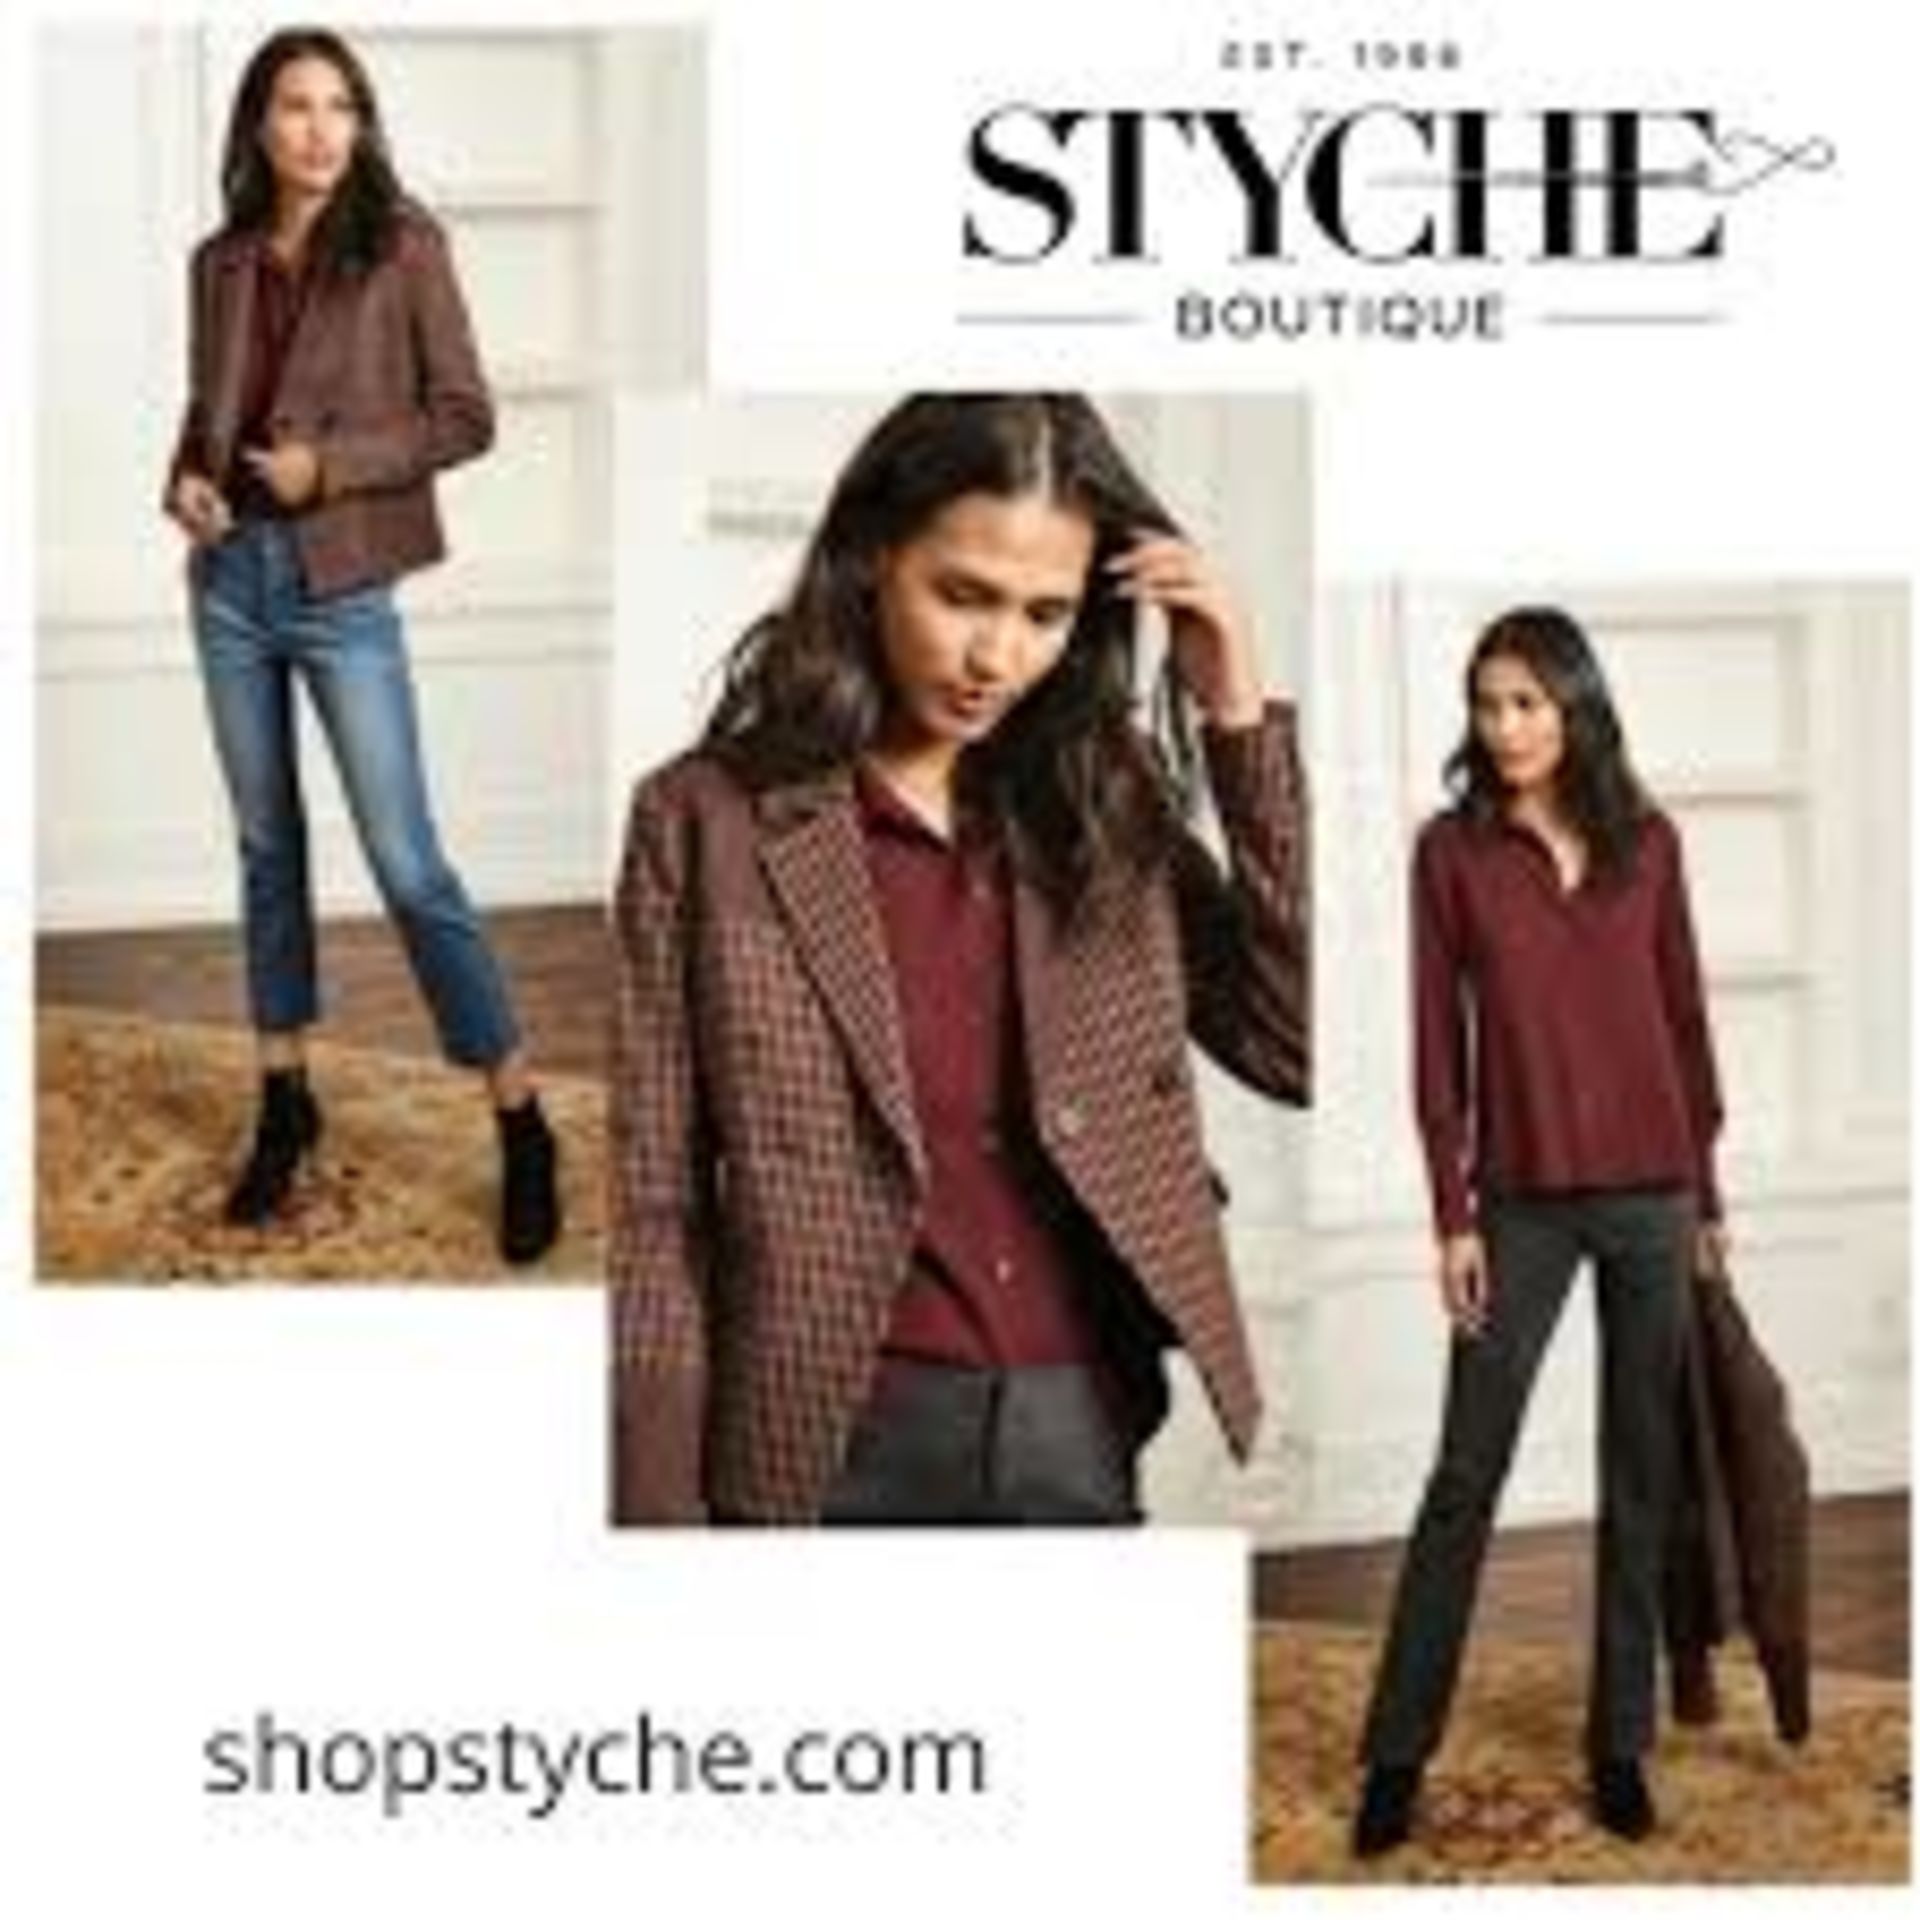 Styche Boutique- Ardmore, PA